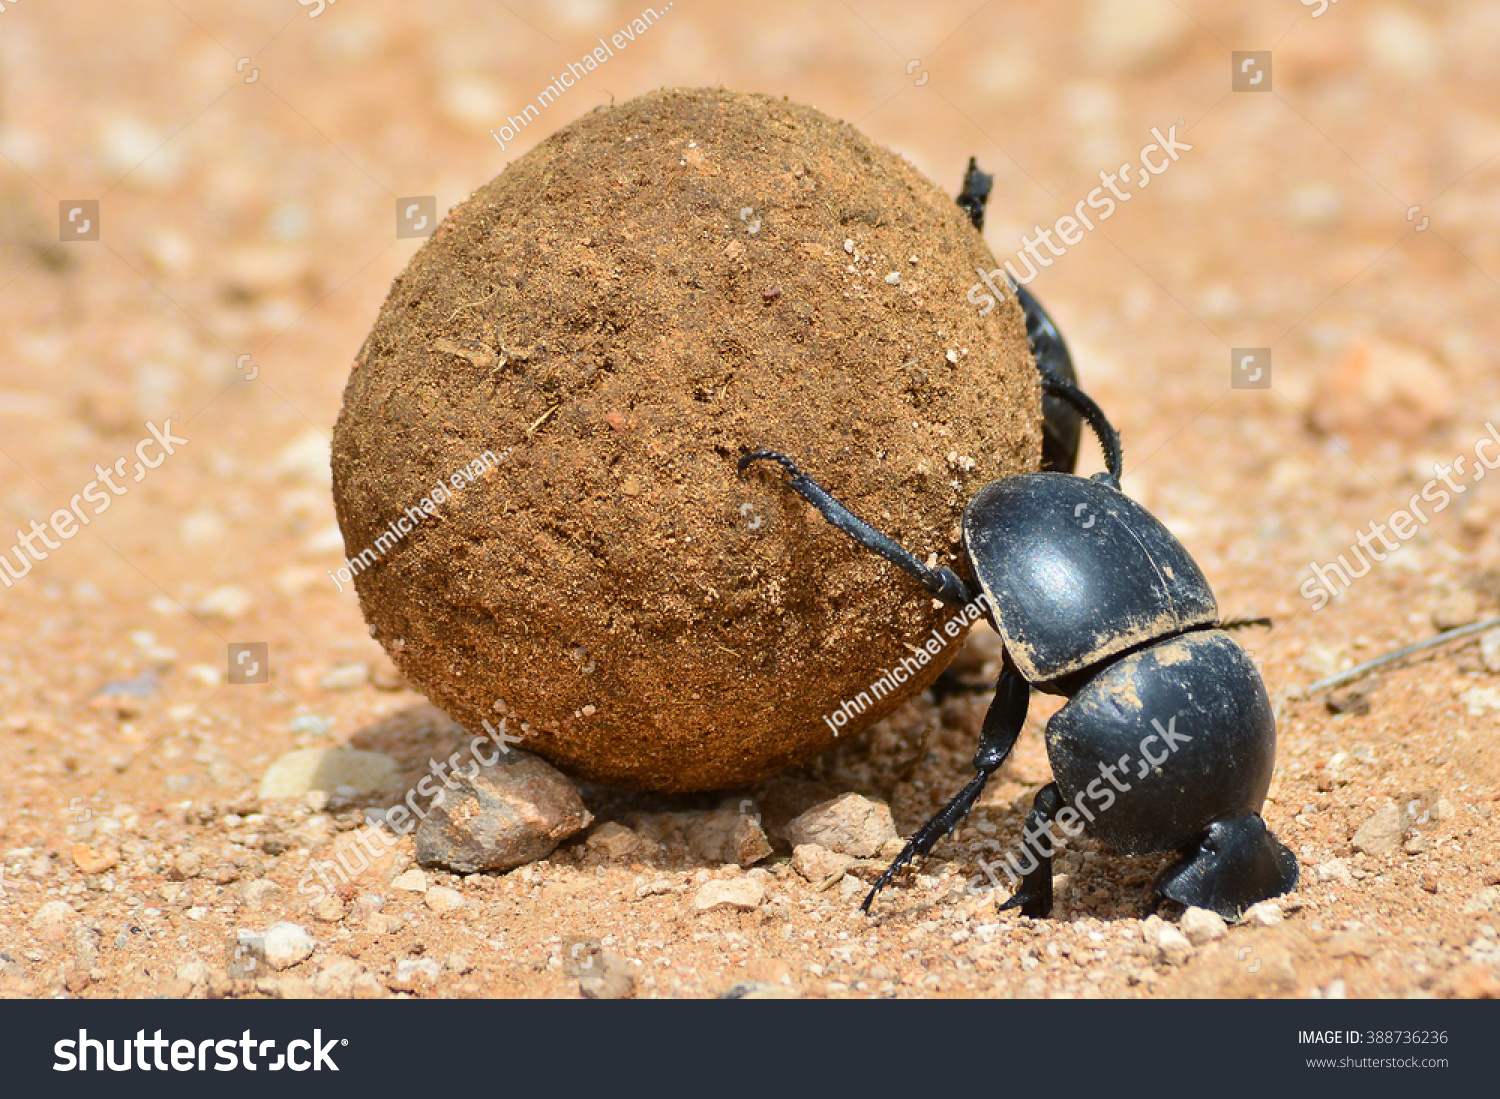 Dung beetle rolling a dung ball #388736236